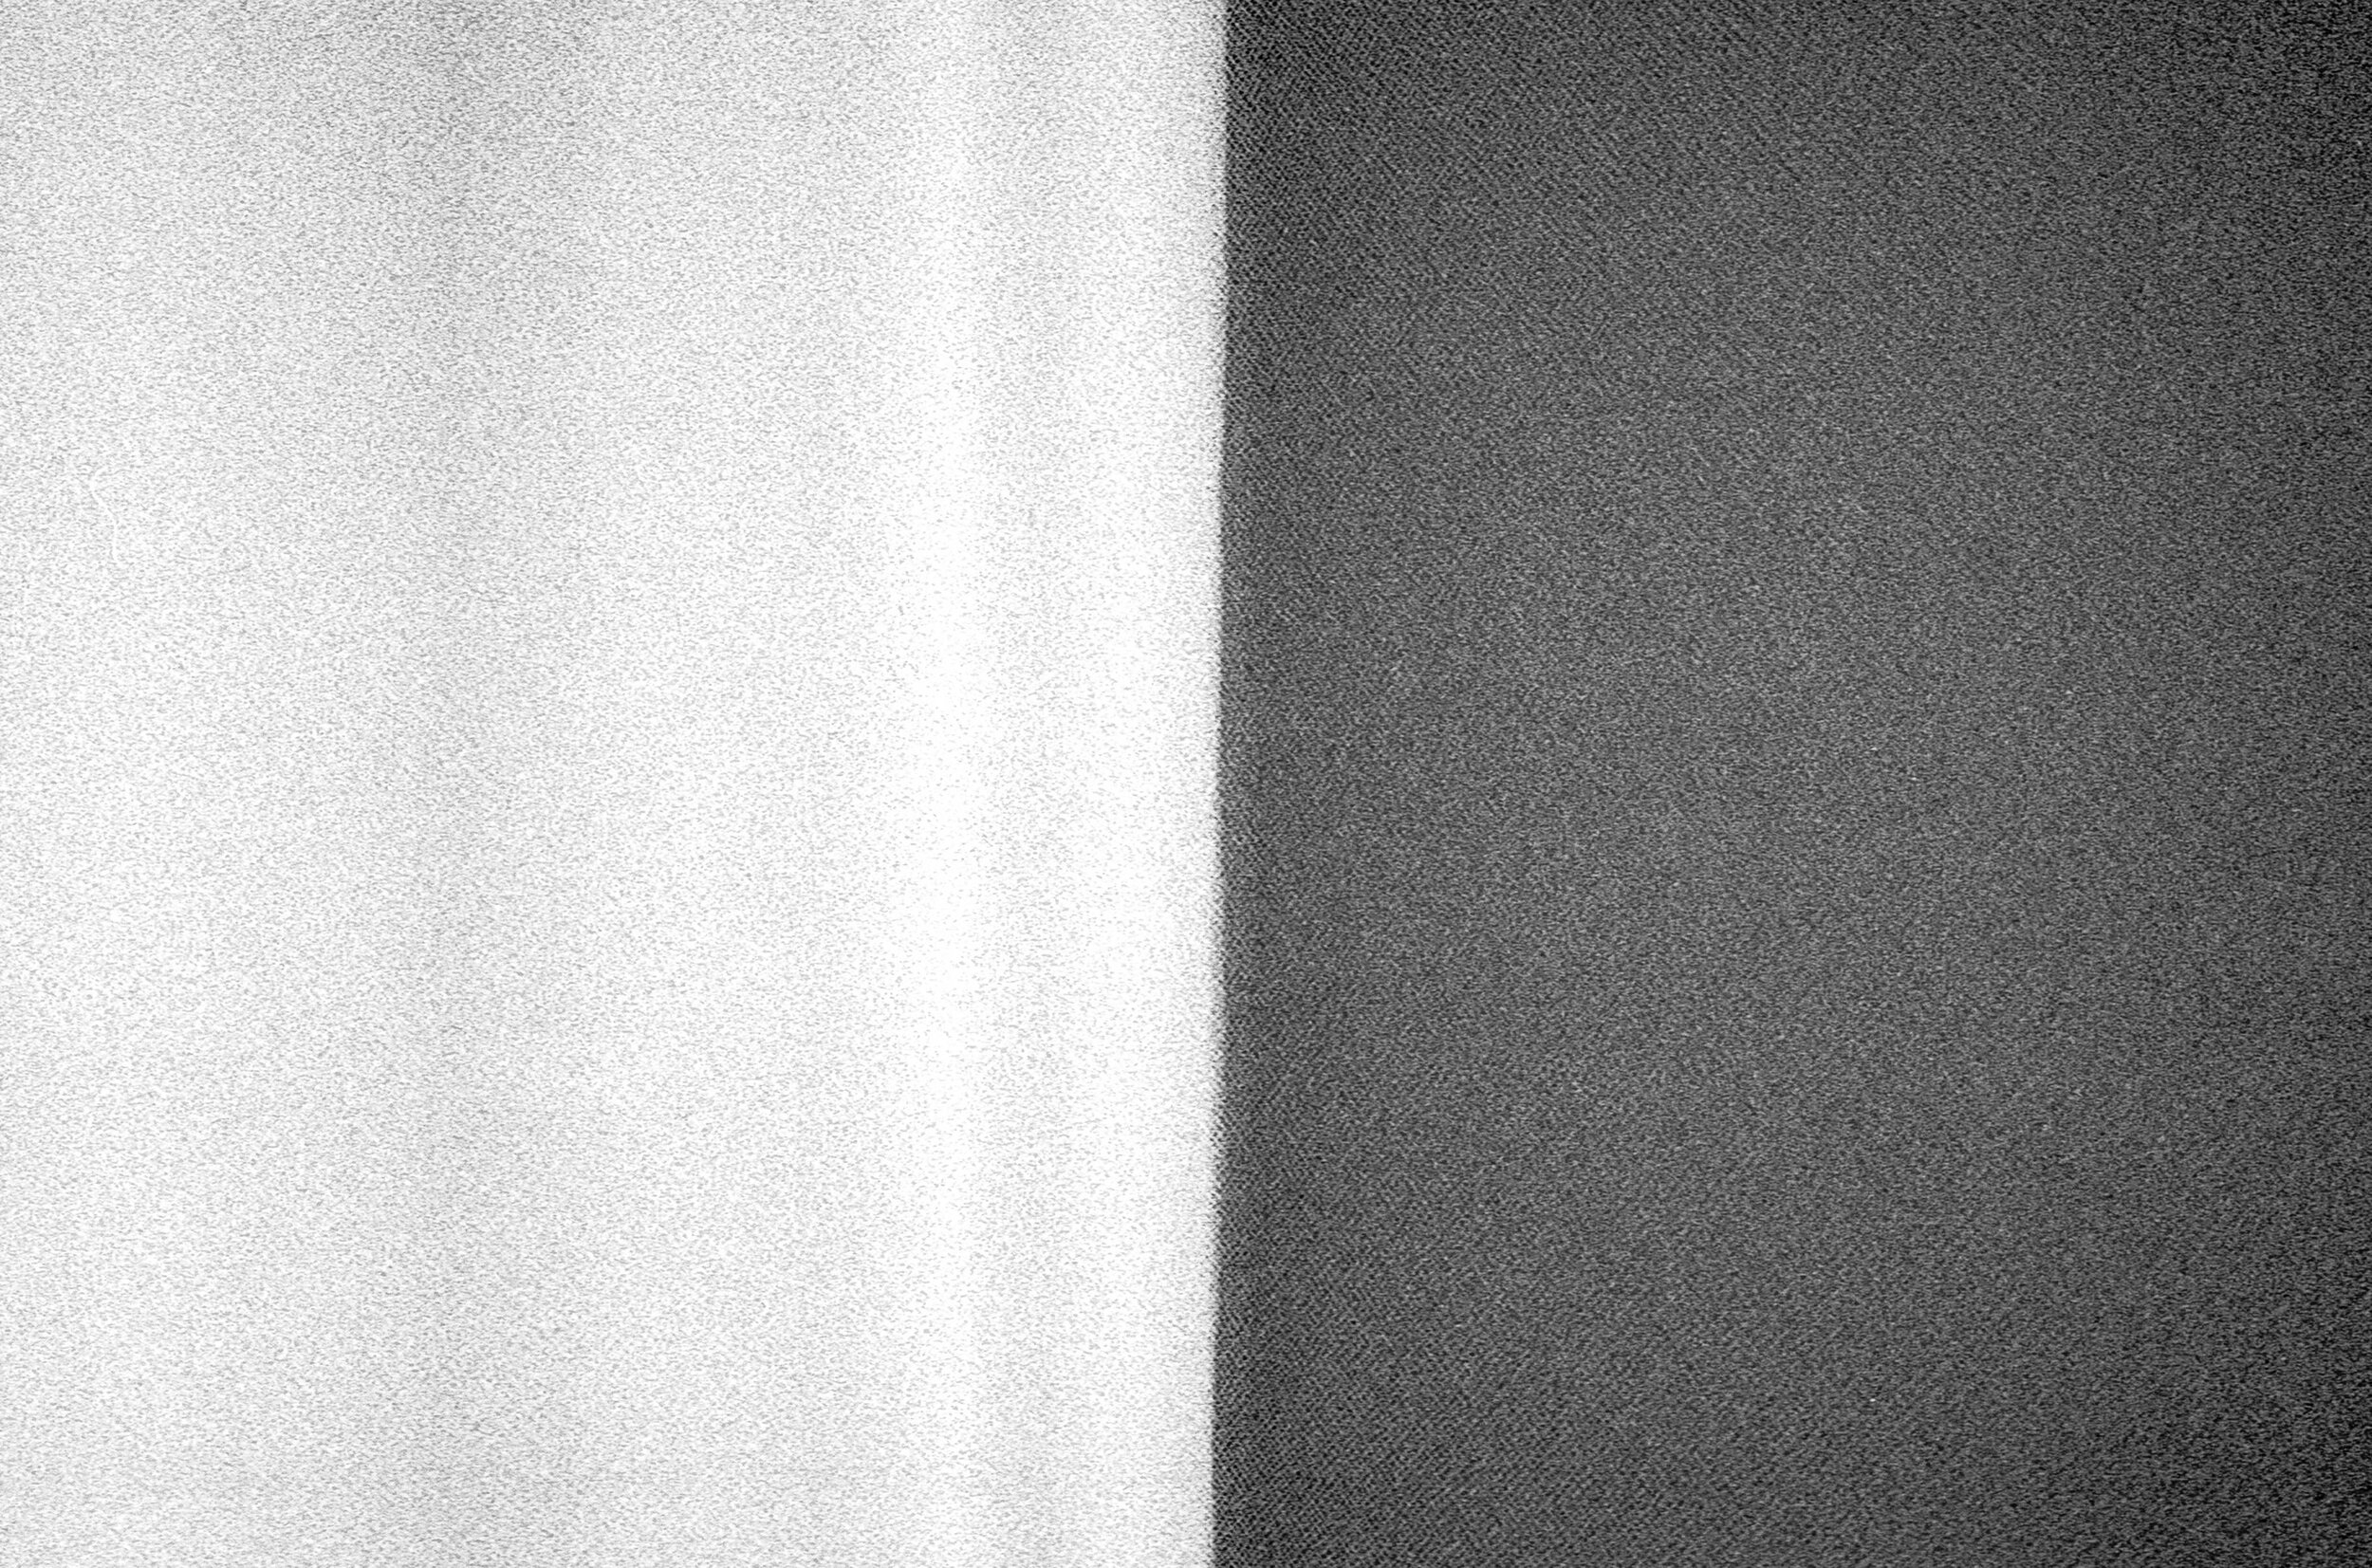 Fer_Parra_film_photography_analogueproject_leica_ilfordhp5_04.jpg